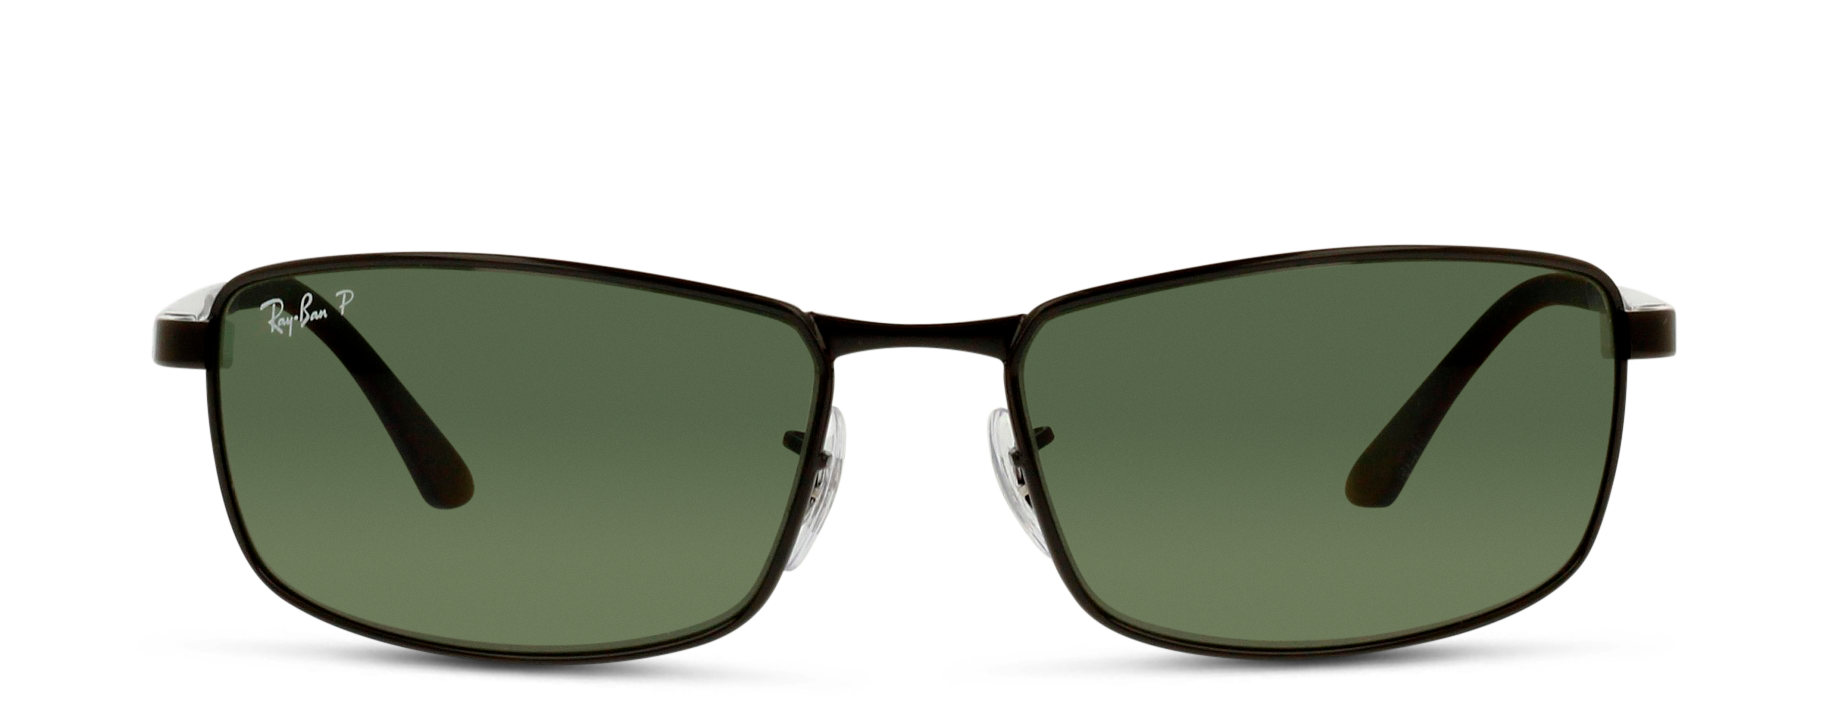 [products.image.front] RAY-BAN RB3498 002/9A